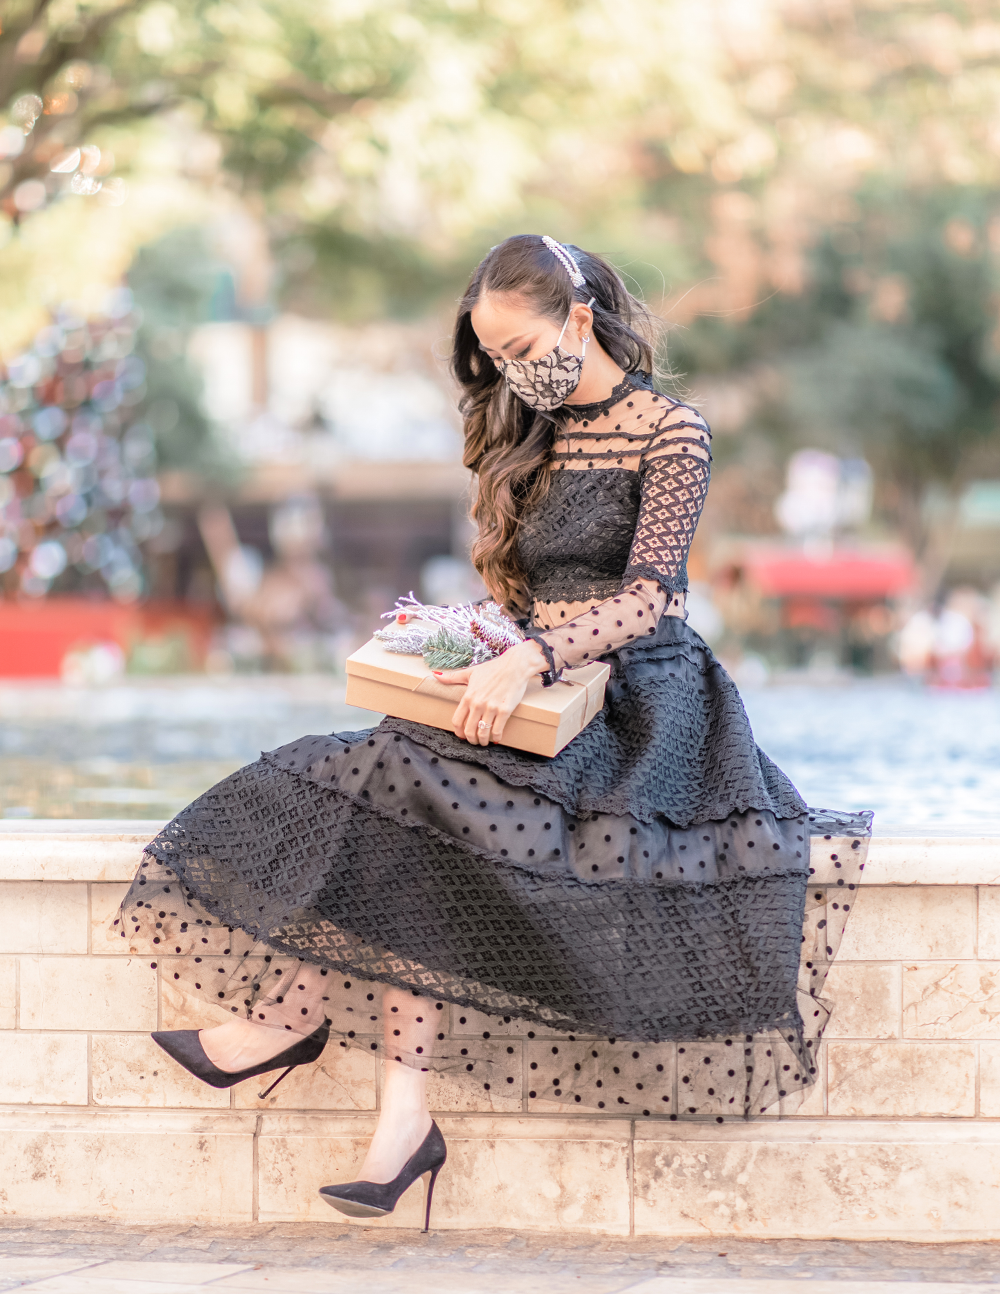 HOW TO WEAR A SHEER POLKA DOTS OUTFIT - OUTFITS